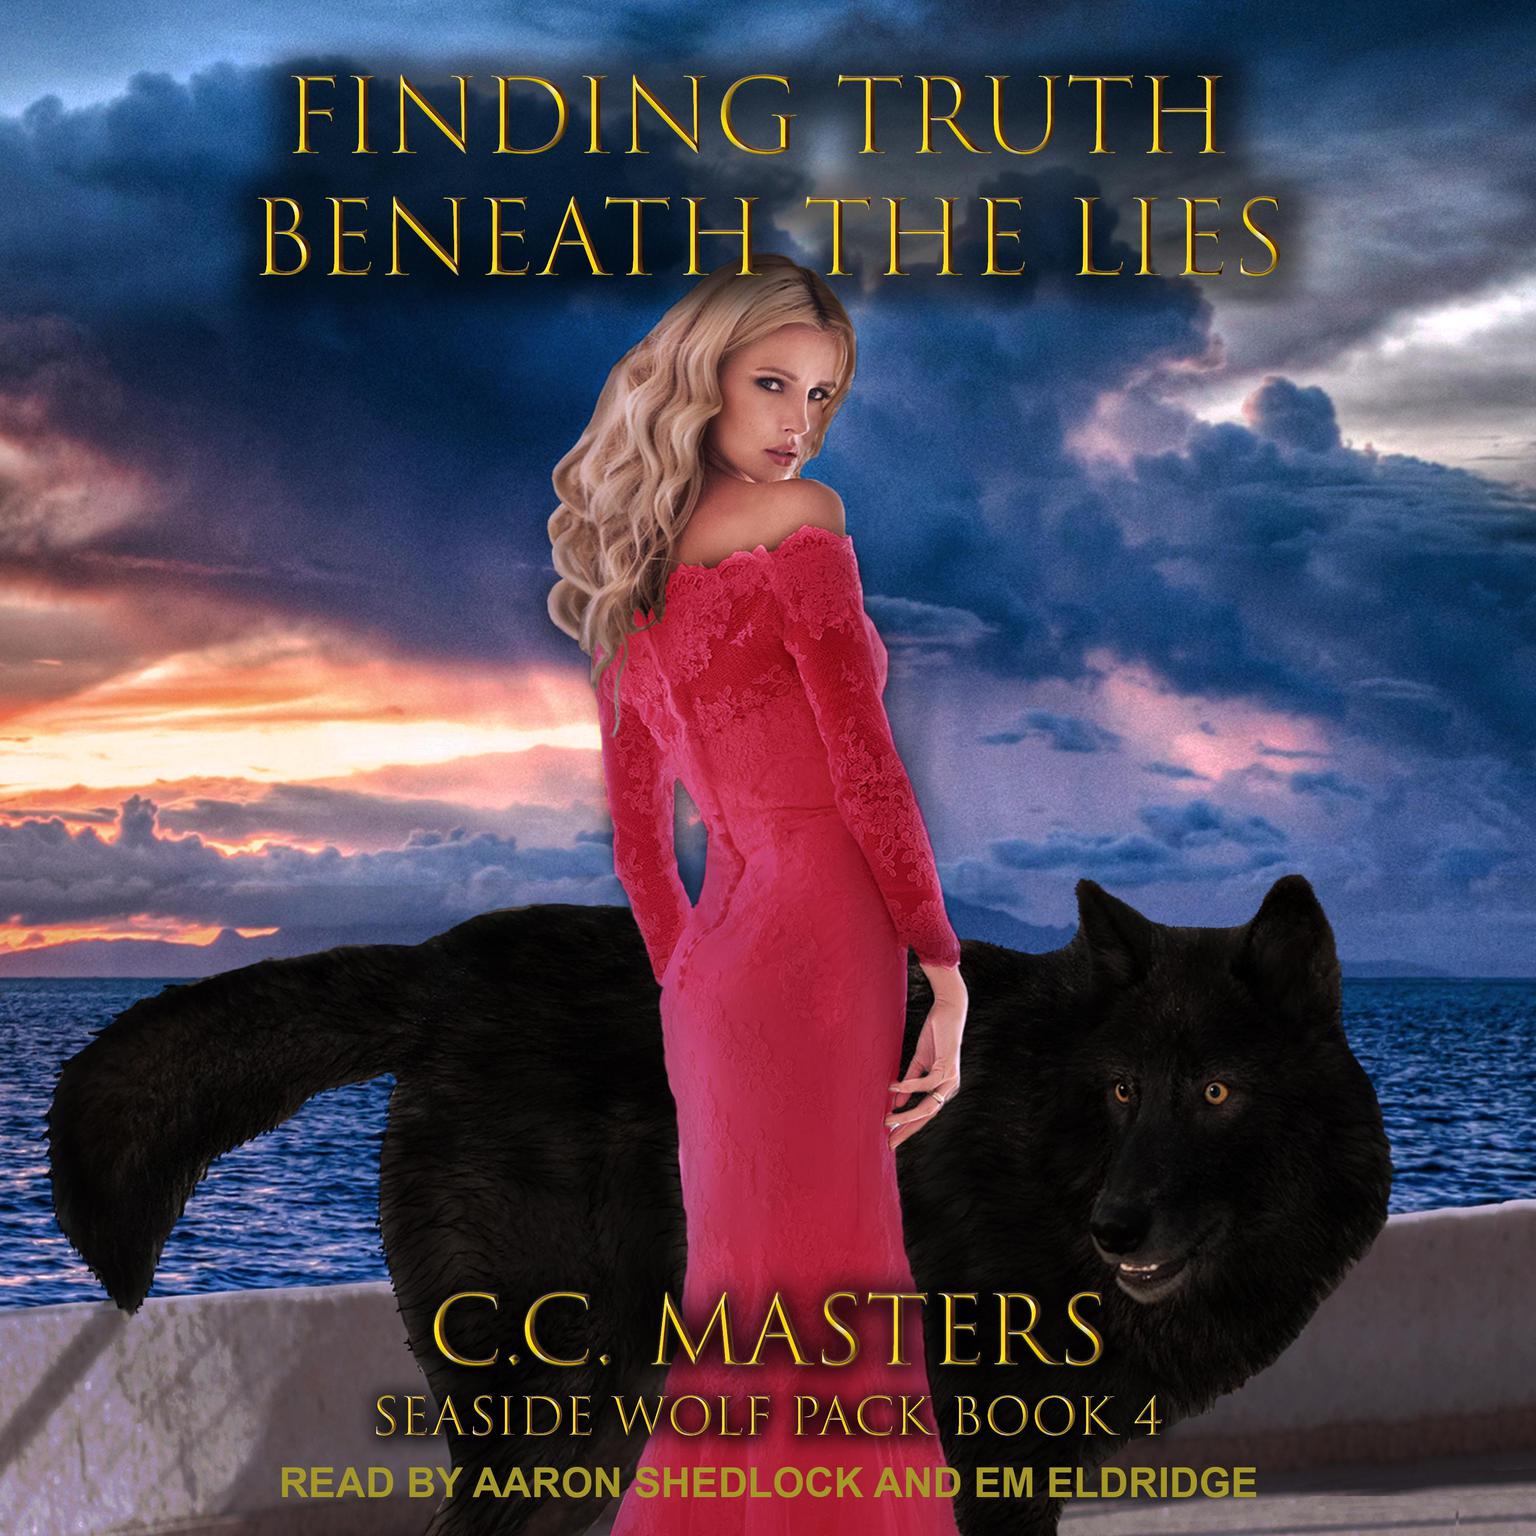 Finding Truth Beneath the Lies: Seaside Wolf Pack Book 4 Audiobook, by C.C. Masters